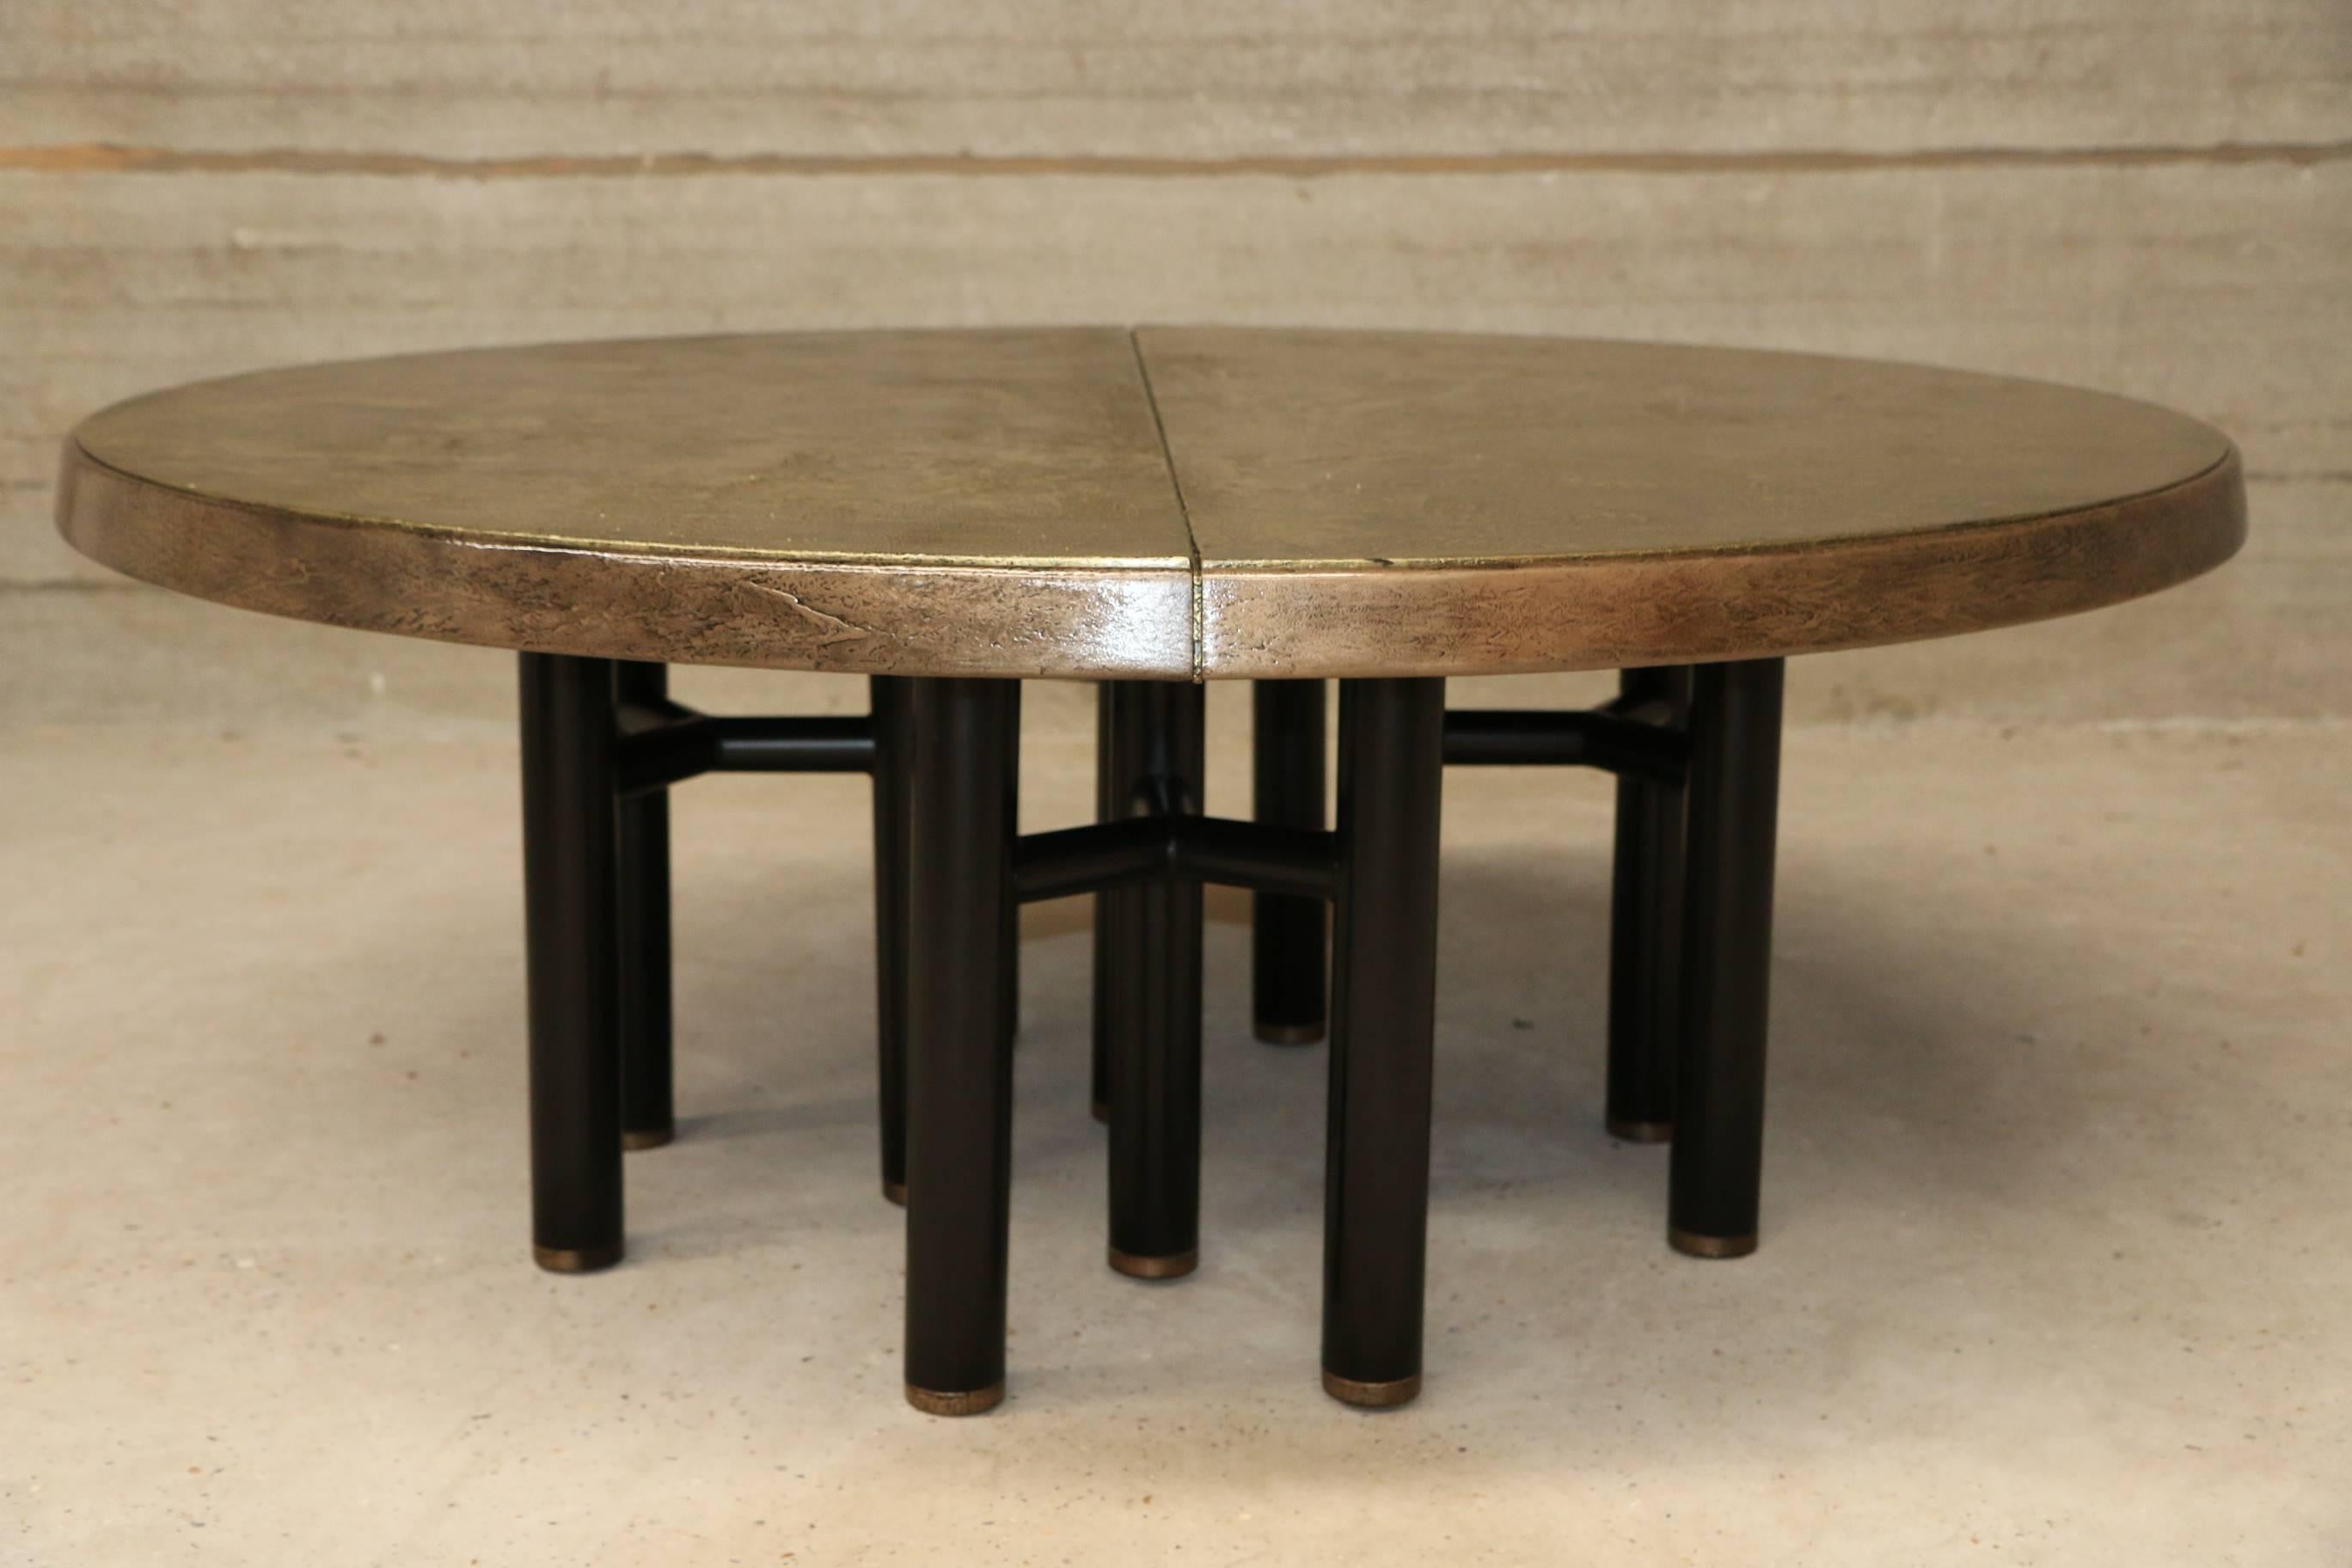 Stunning dining table by Ico Parisi for MIM, Italy. 
This table originally had black tabletop and wooden base and edging.
Funky vintage coated the two black tabletop panels with real brass layers, and the edging in a thin real bronze coating. They